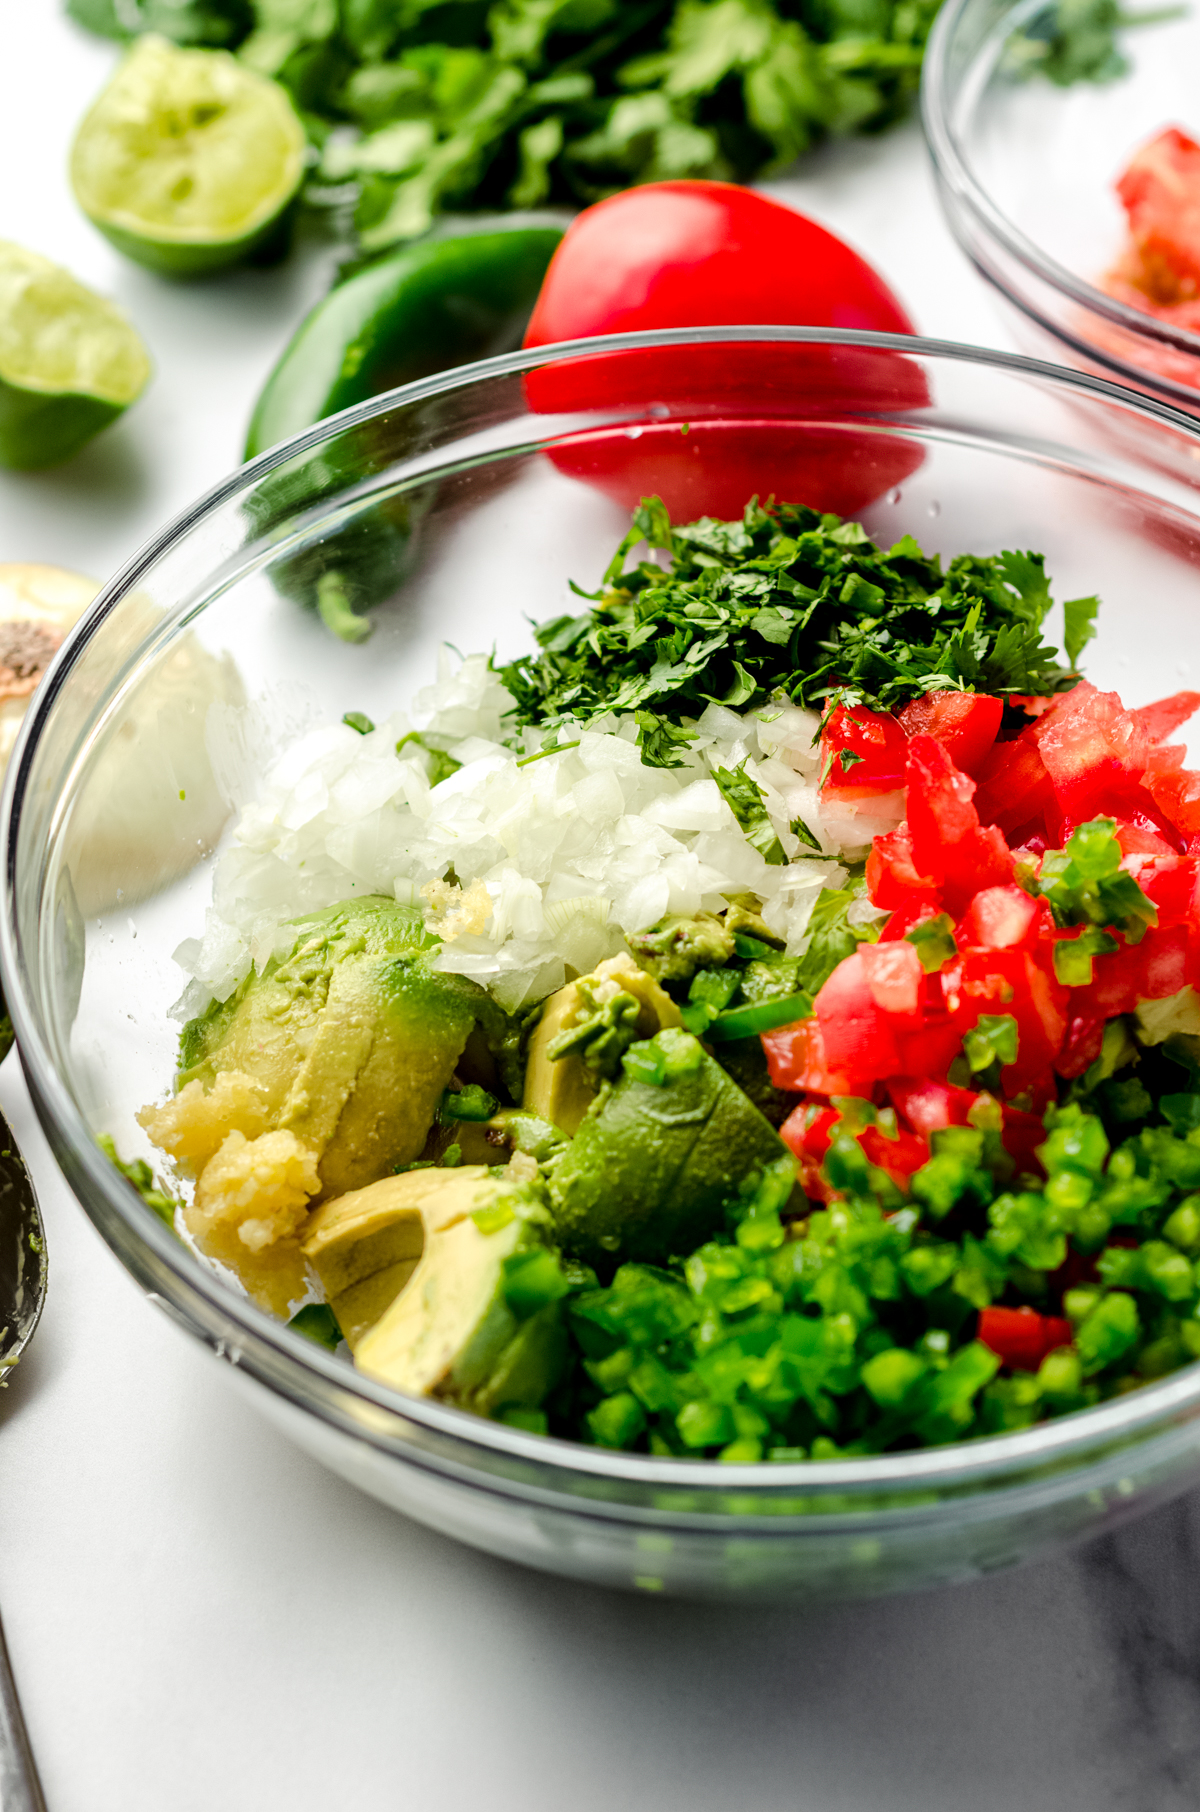 A large glass bowl full of ingredients to make homemade guacamole.